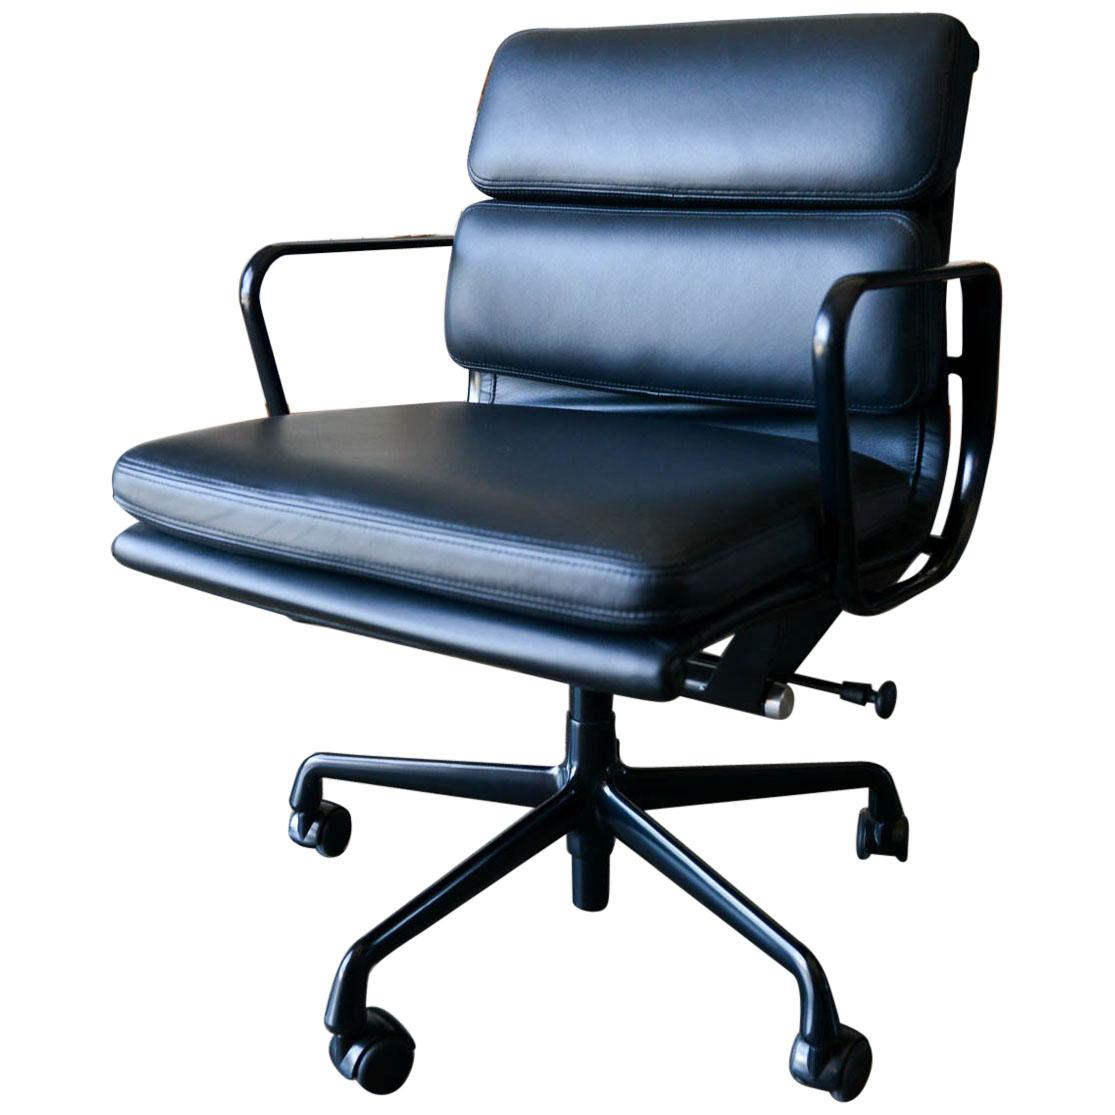 Eames Soft Pad Management Chair in Black Leather